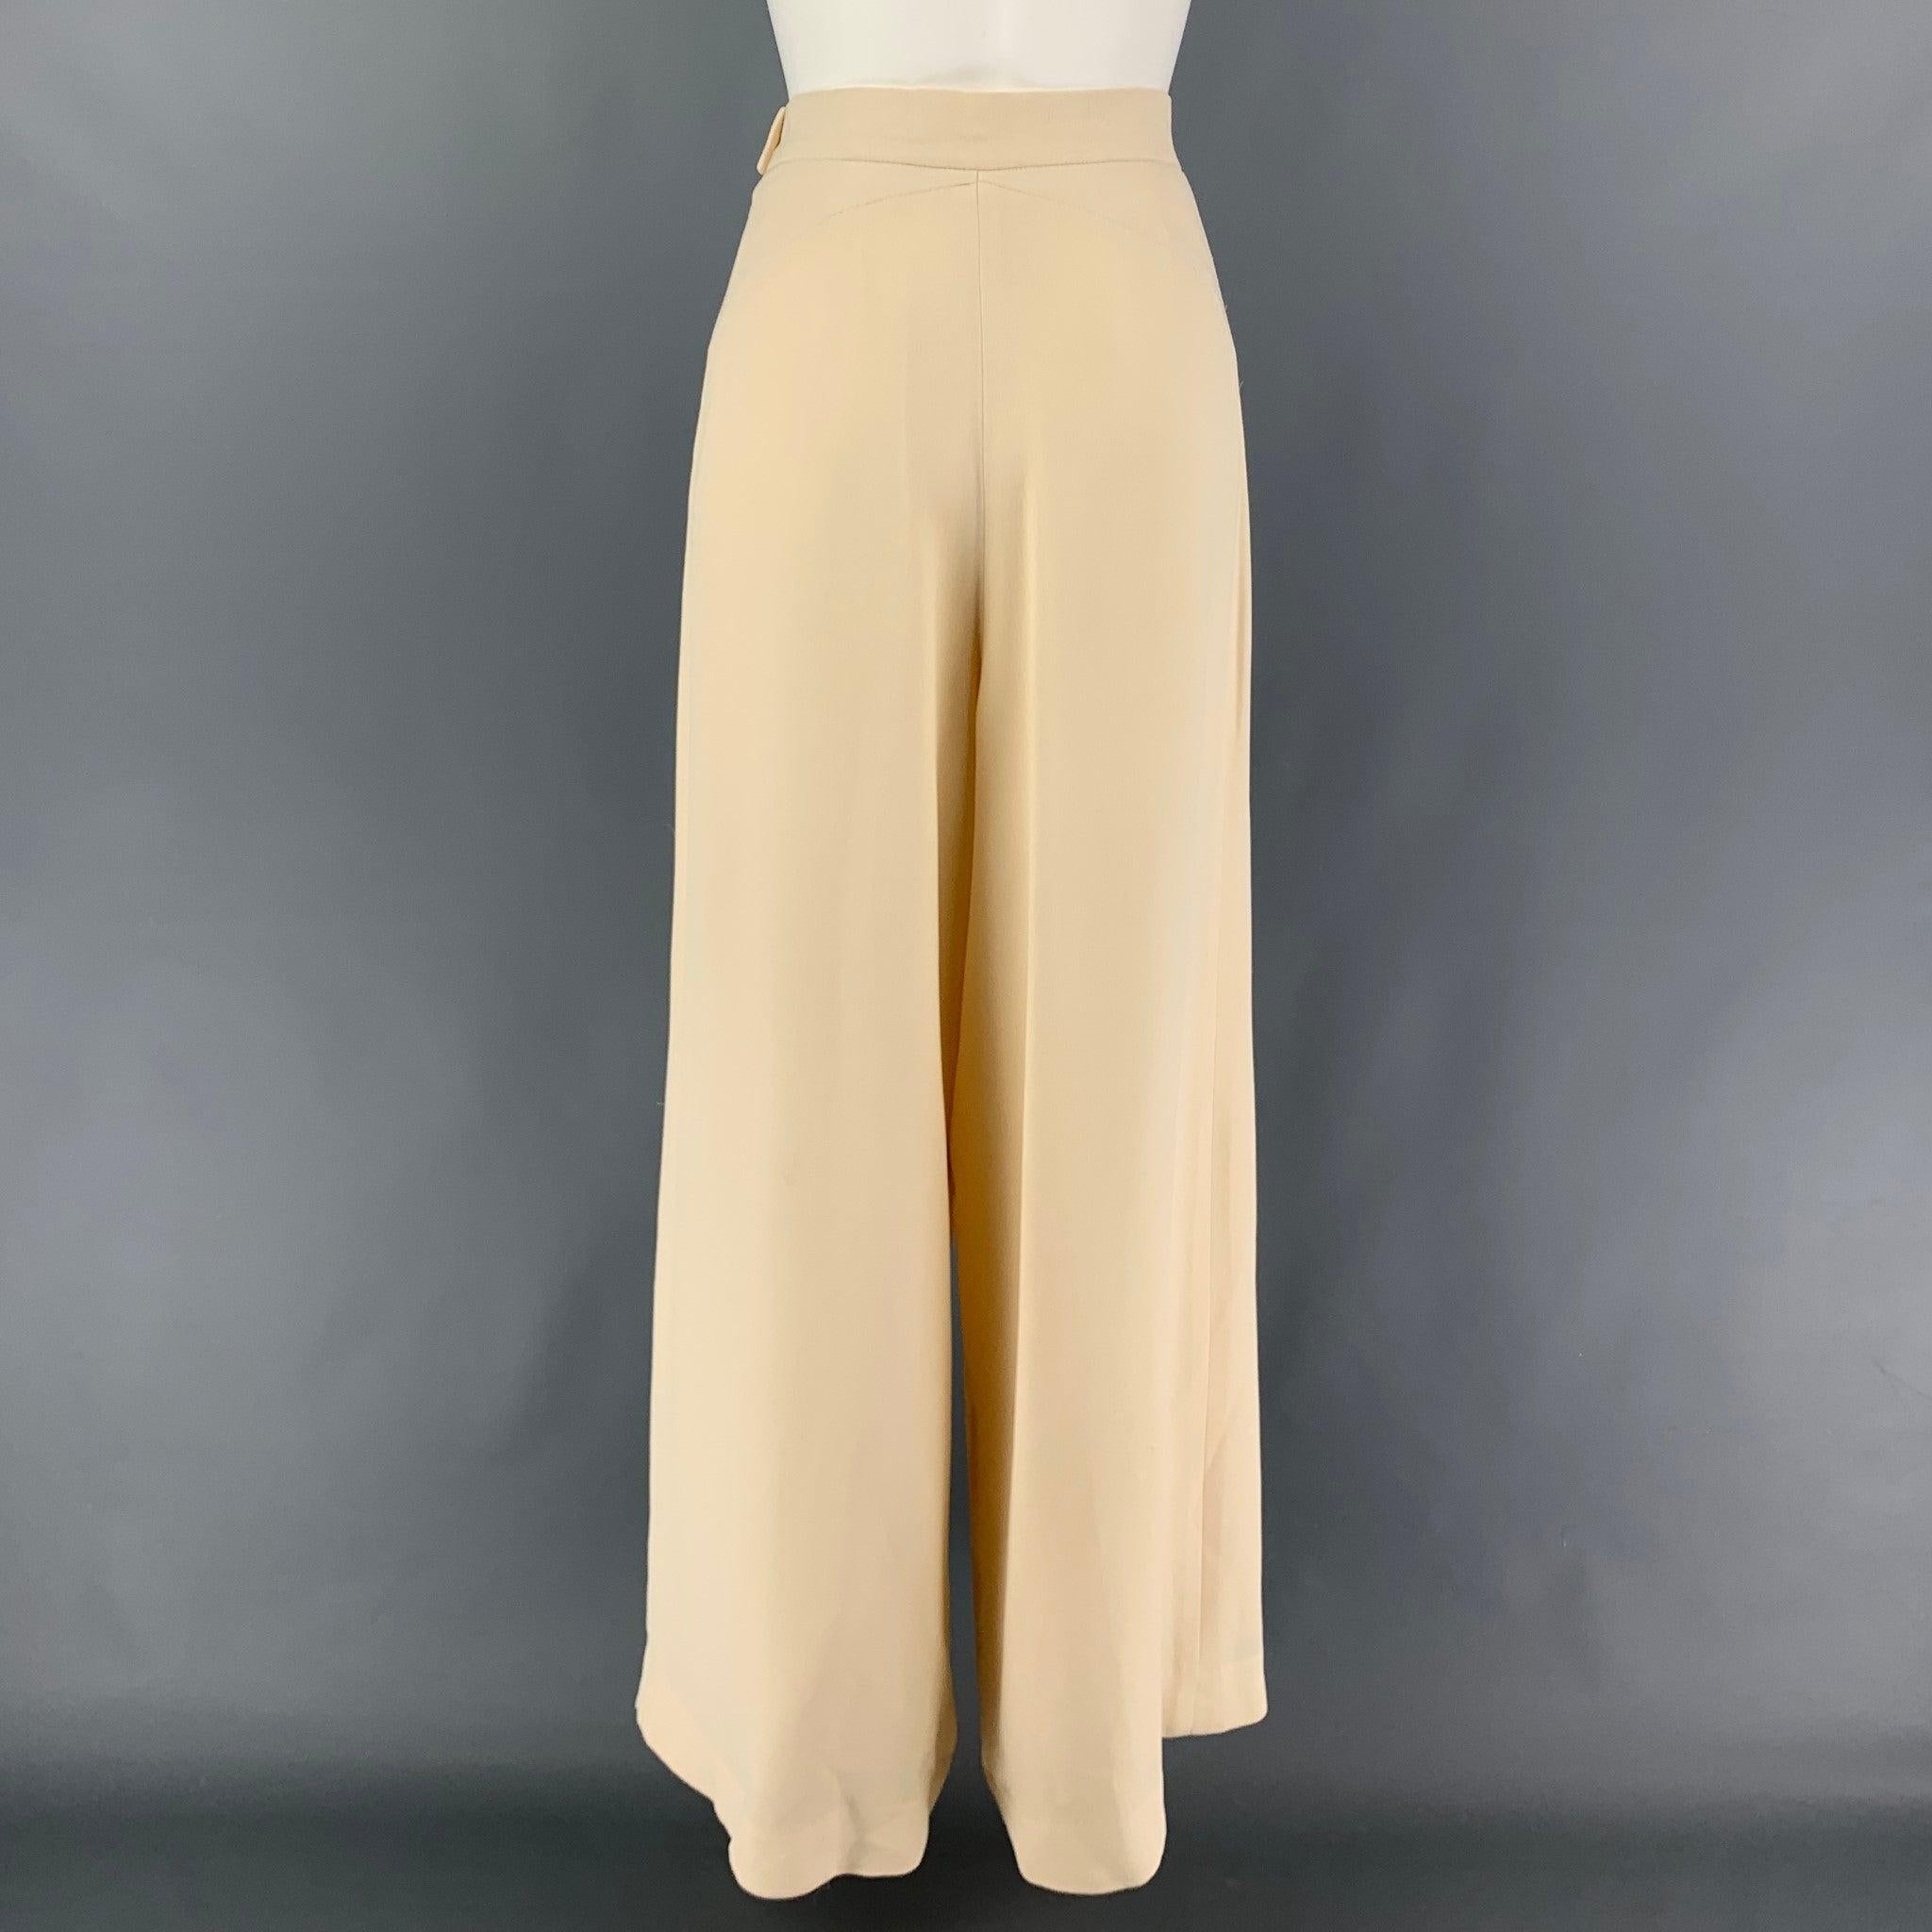 CHLOE dress pants comes in a cream silke featuring a wide leg style, high waist, top stitching, and a side zip up closure.
 Good
 Pre-Owned Condition. Light wear. As-Is.  
 

 Marked:  40 
 

 Measurements: 
  Waist: 28 inches Rise: 15.5 inches